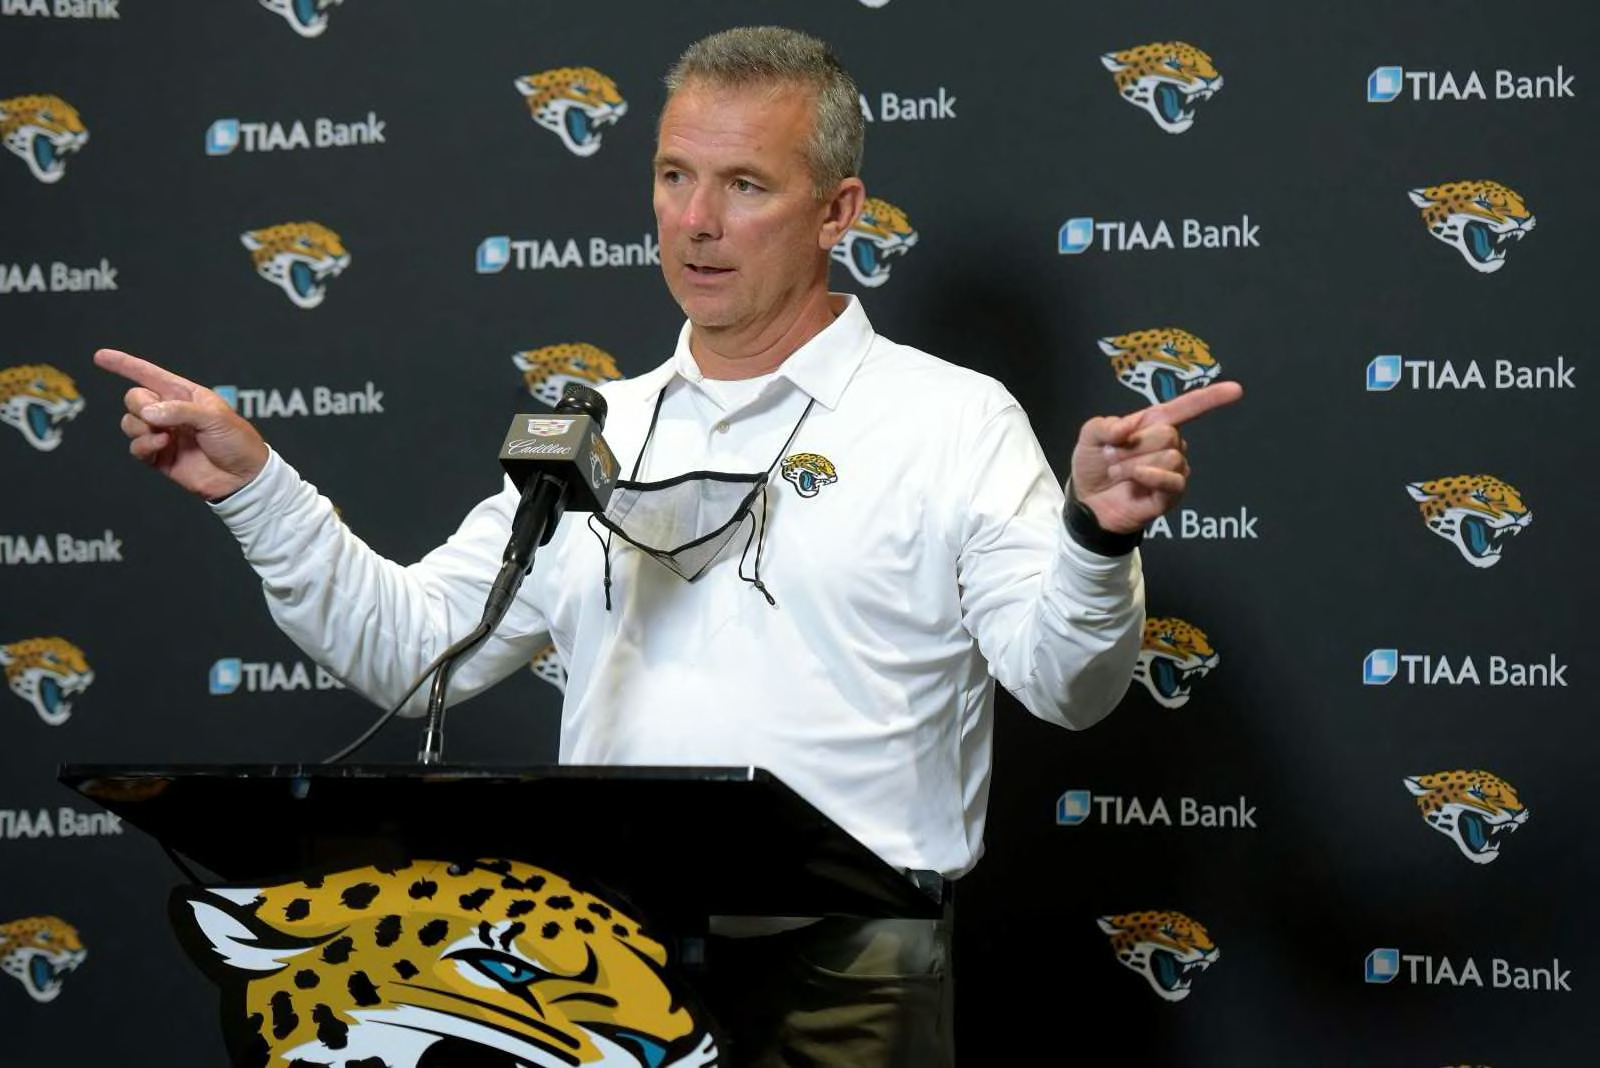 NFL Draft 2023: What picks do the Jaguars have in the draft this year?